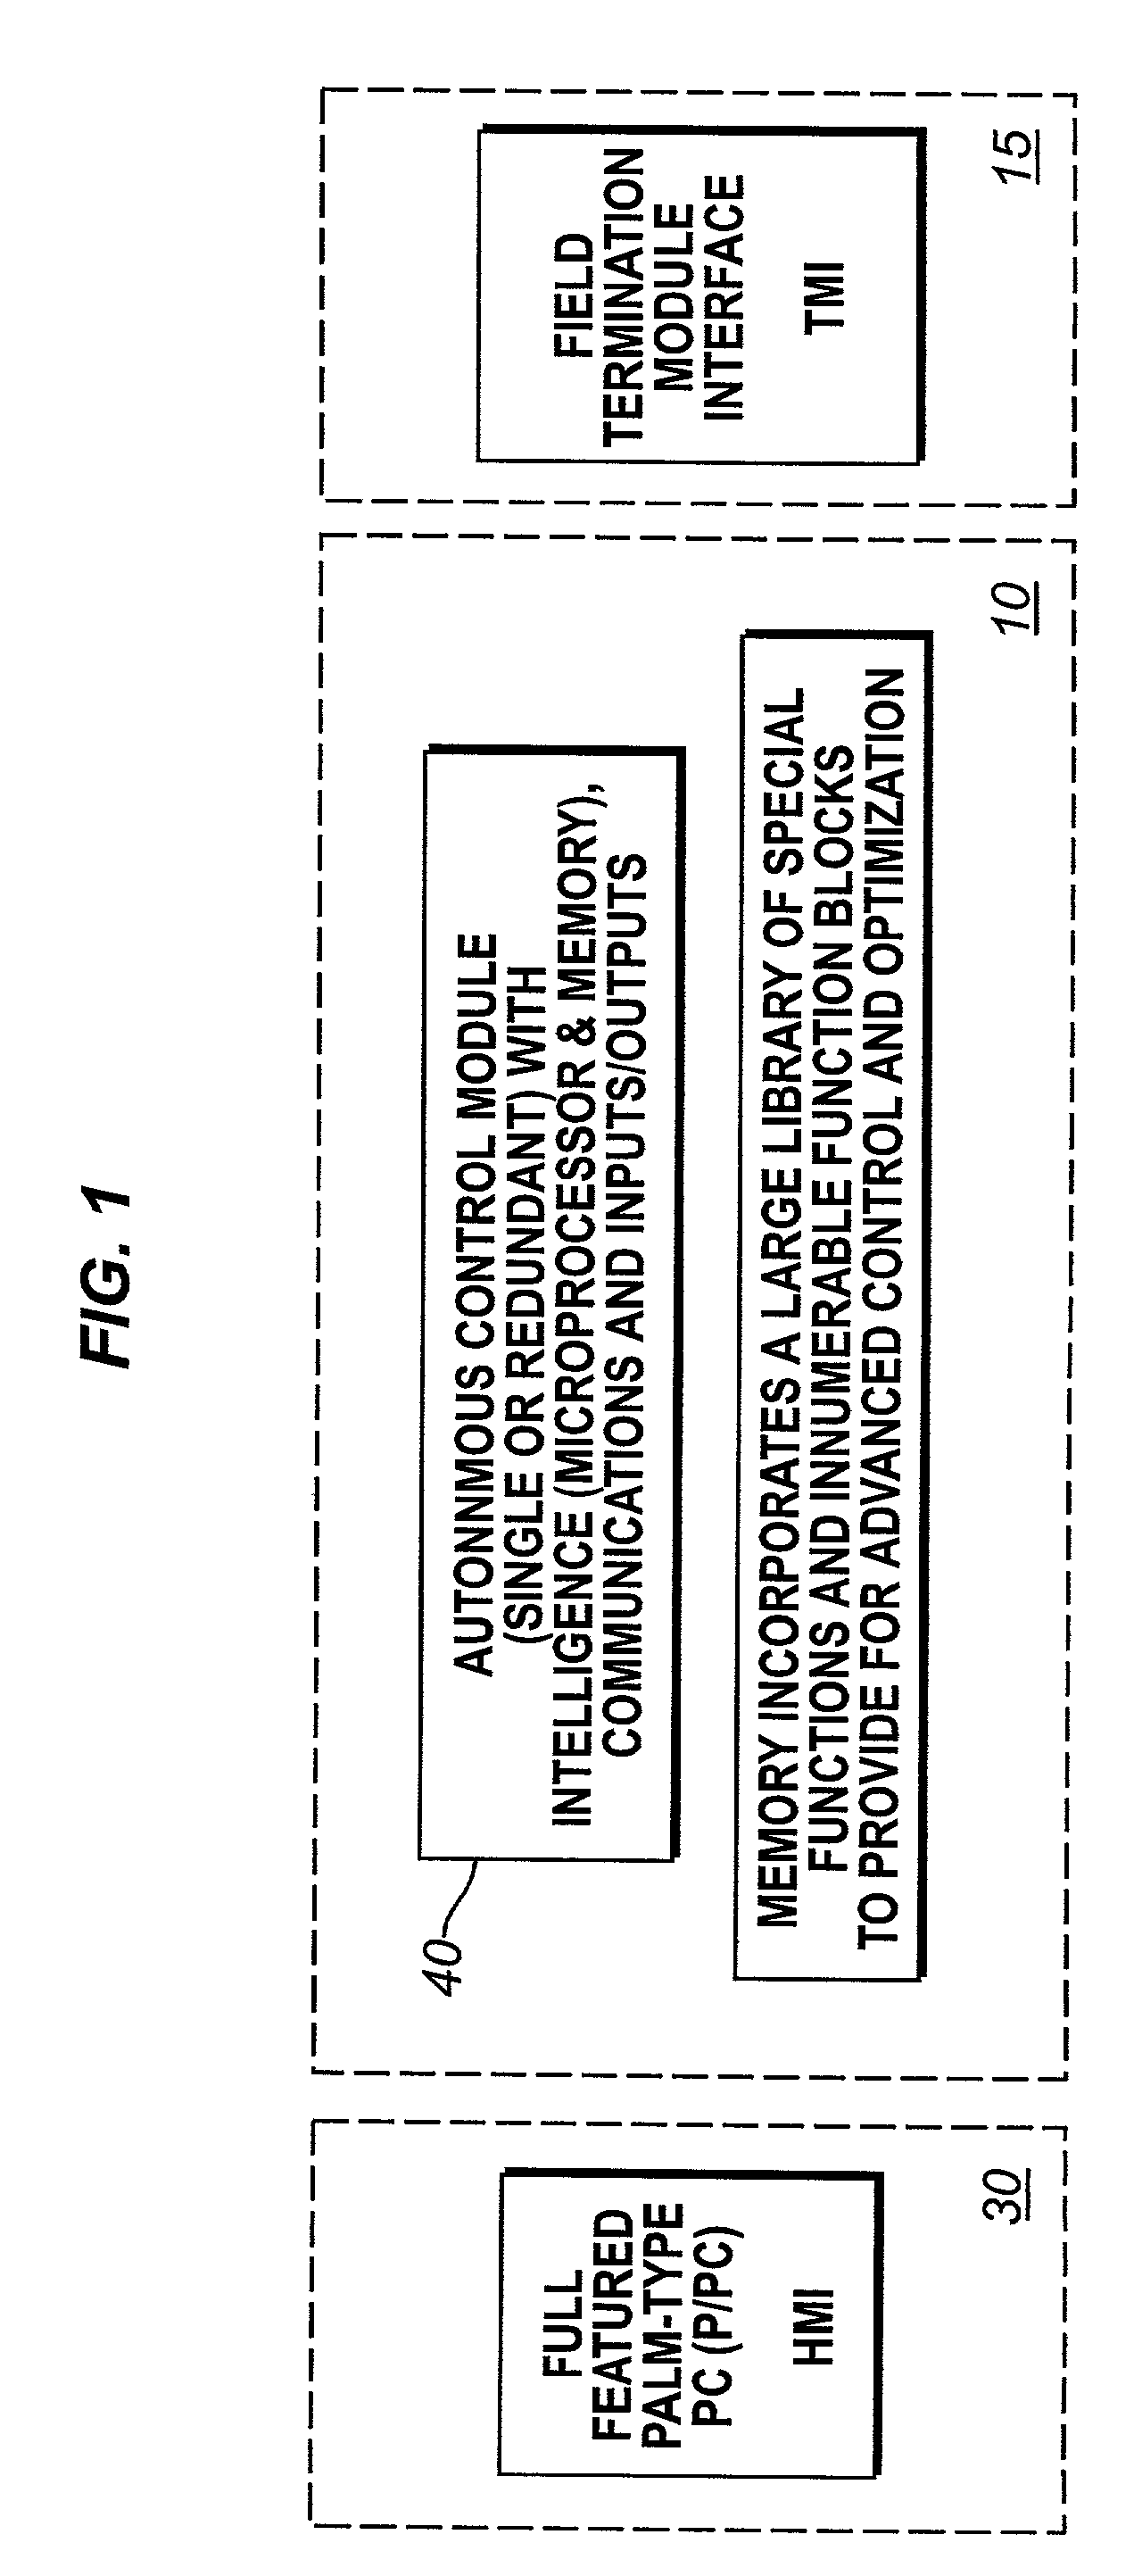 Unit controller with integral full-featured human-machine interface